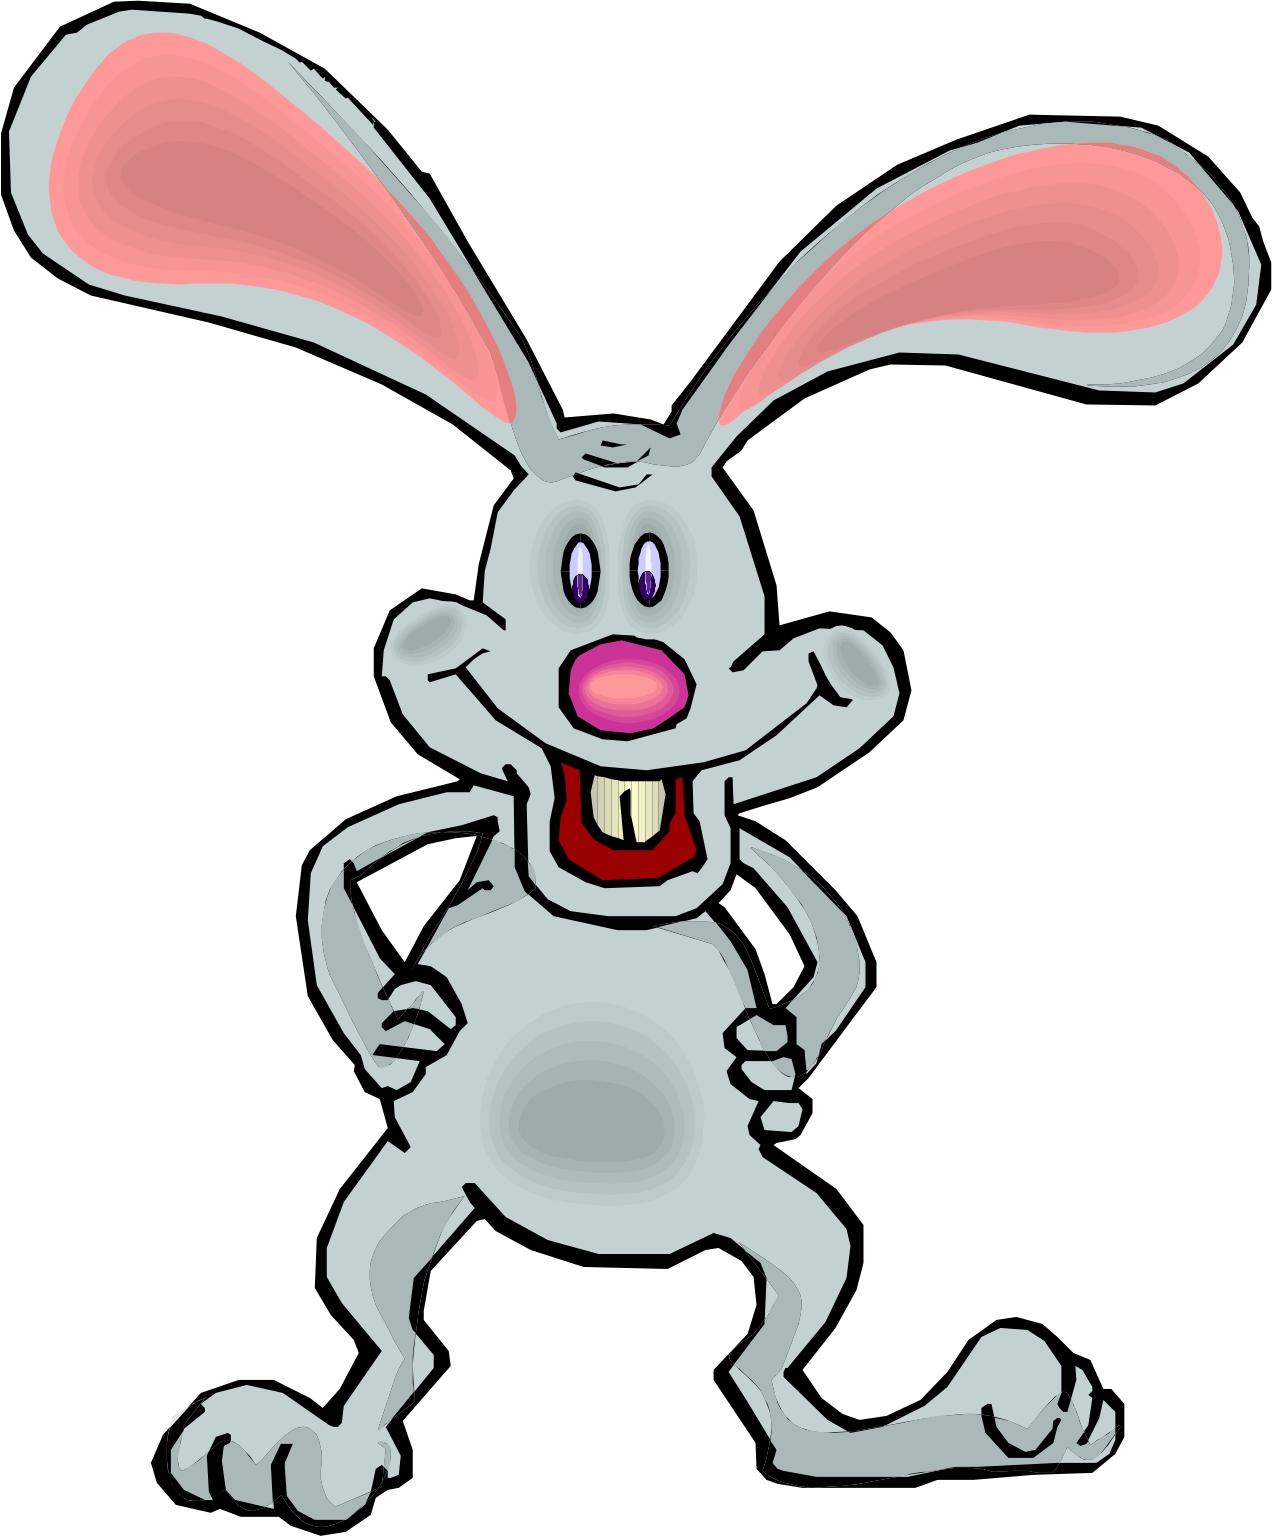 Cartoon Rabbit Picture - Clipart library